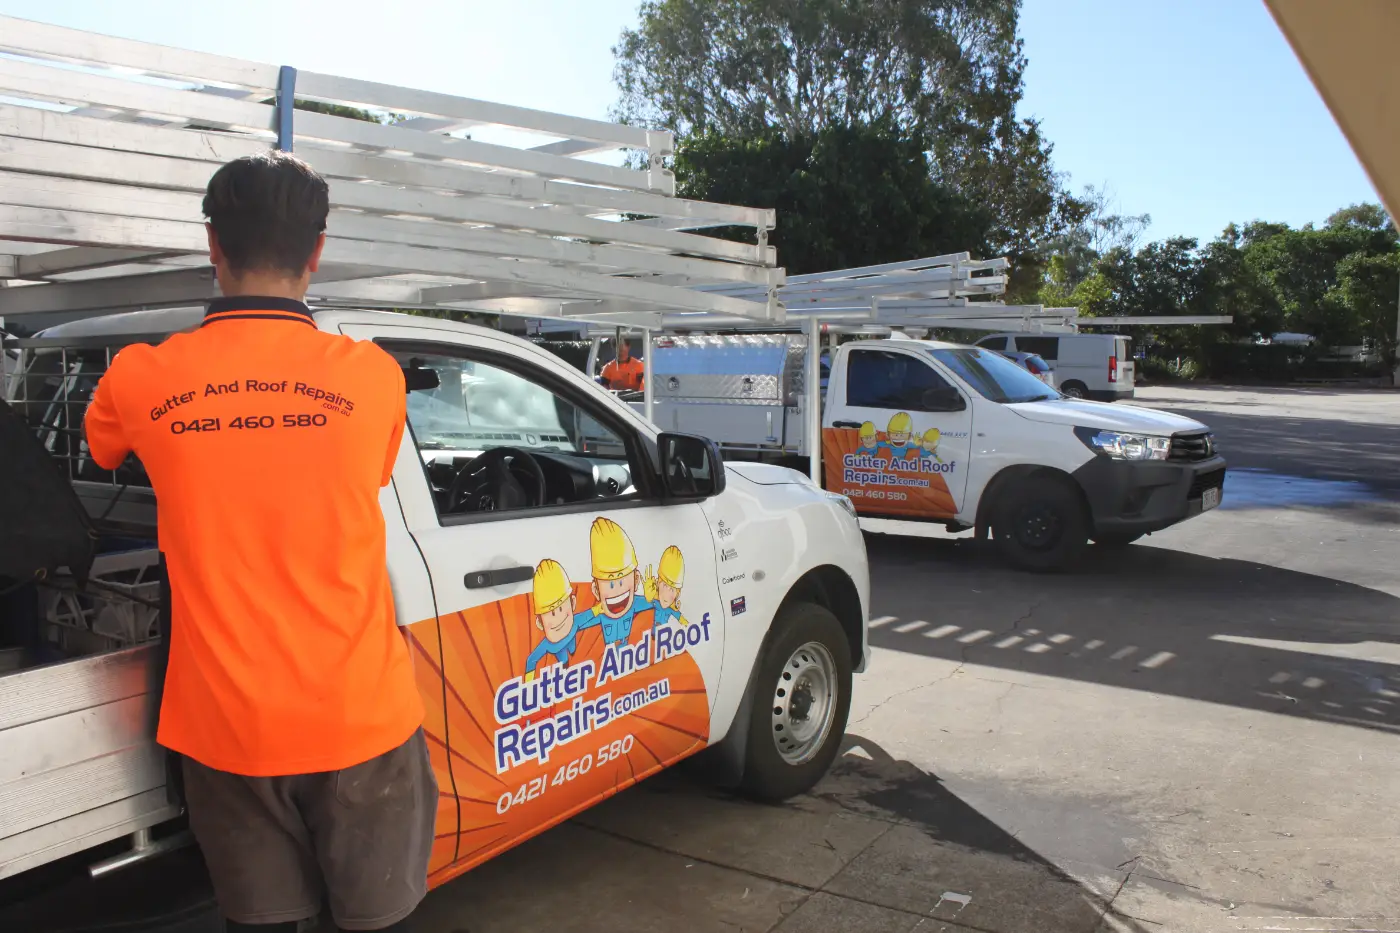 Gutter and Roof Repairs roofer standing next to company ute.